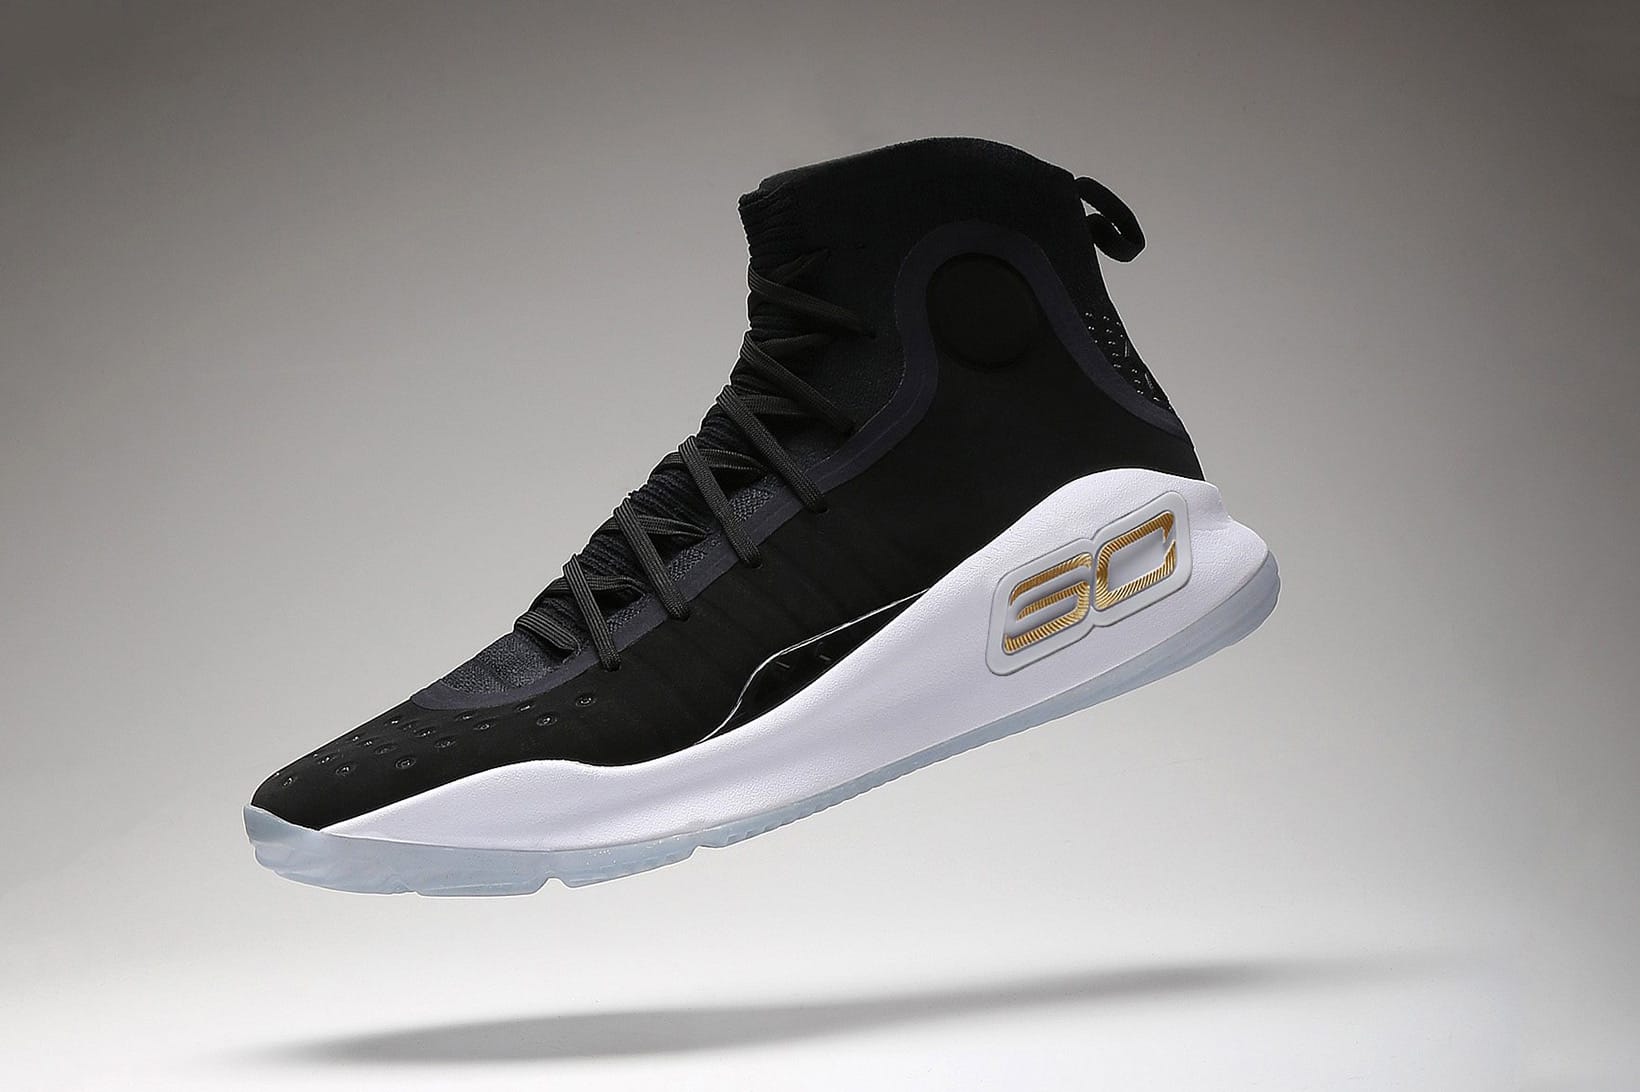 Under Armour Curry 4 in Black for NBA 